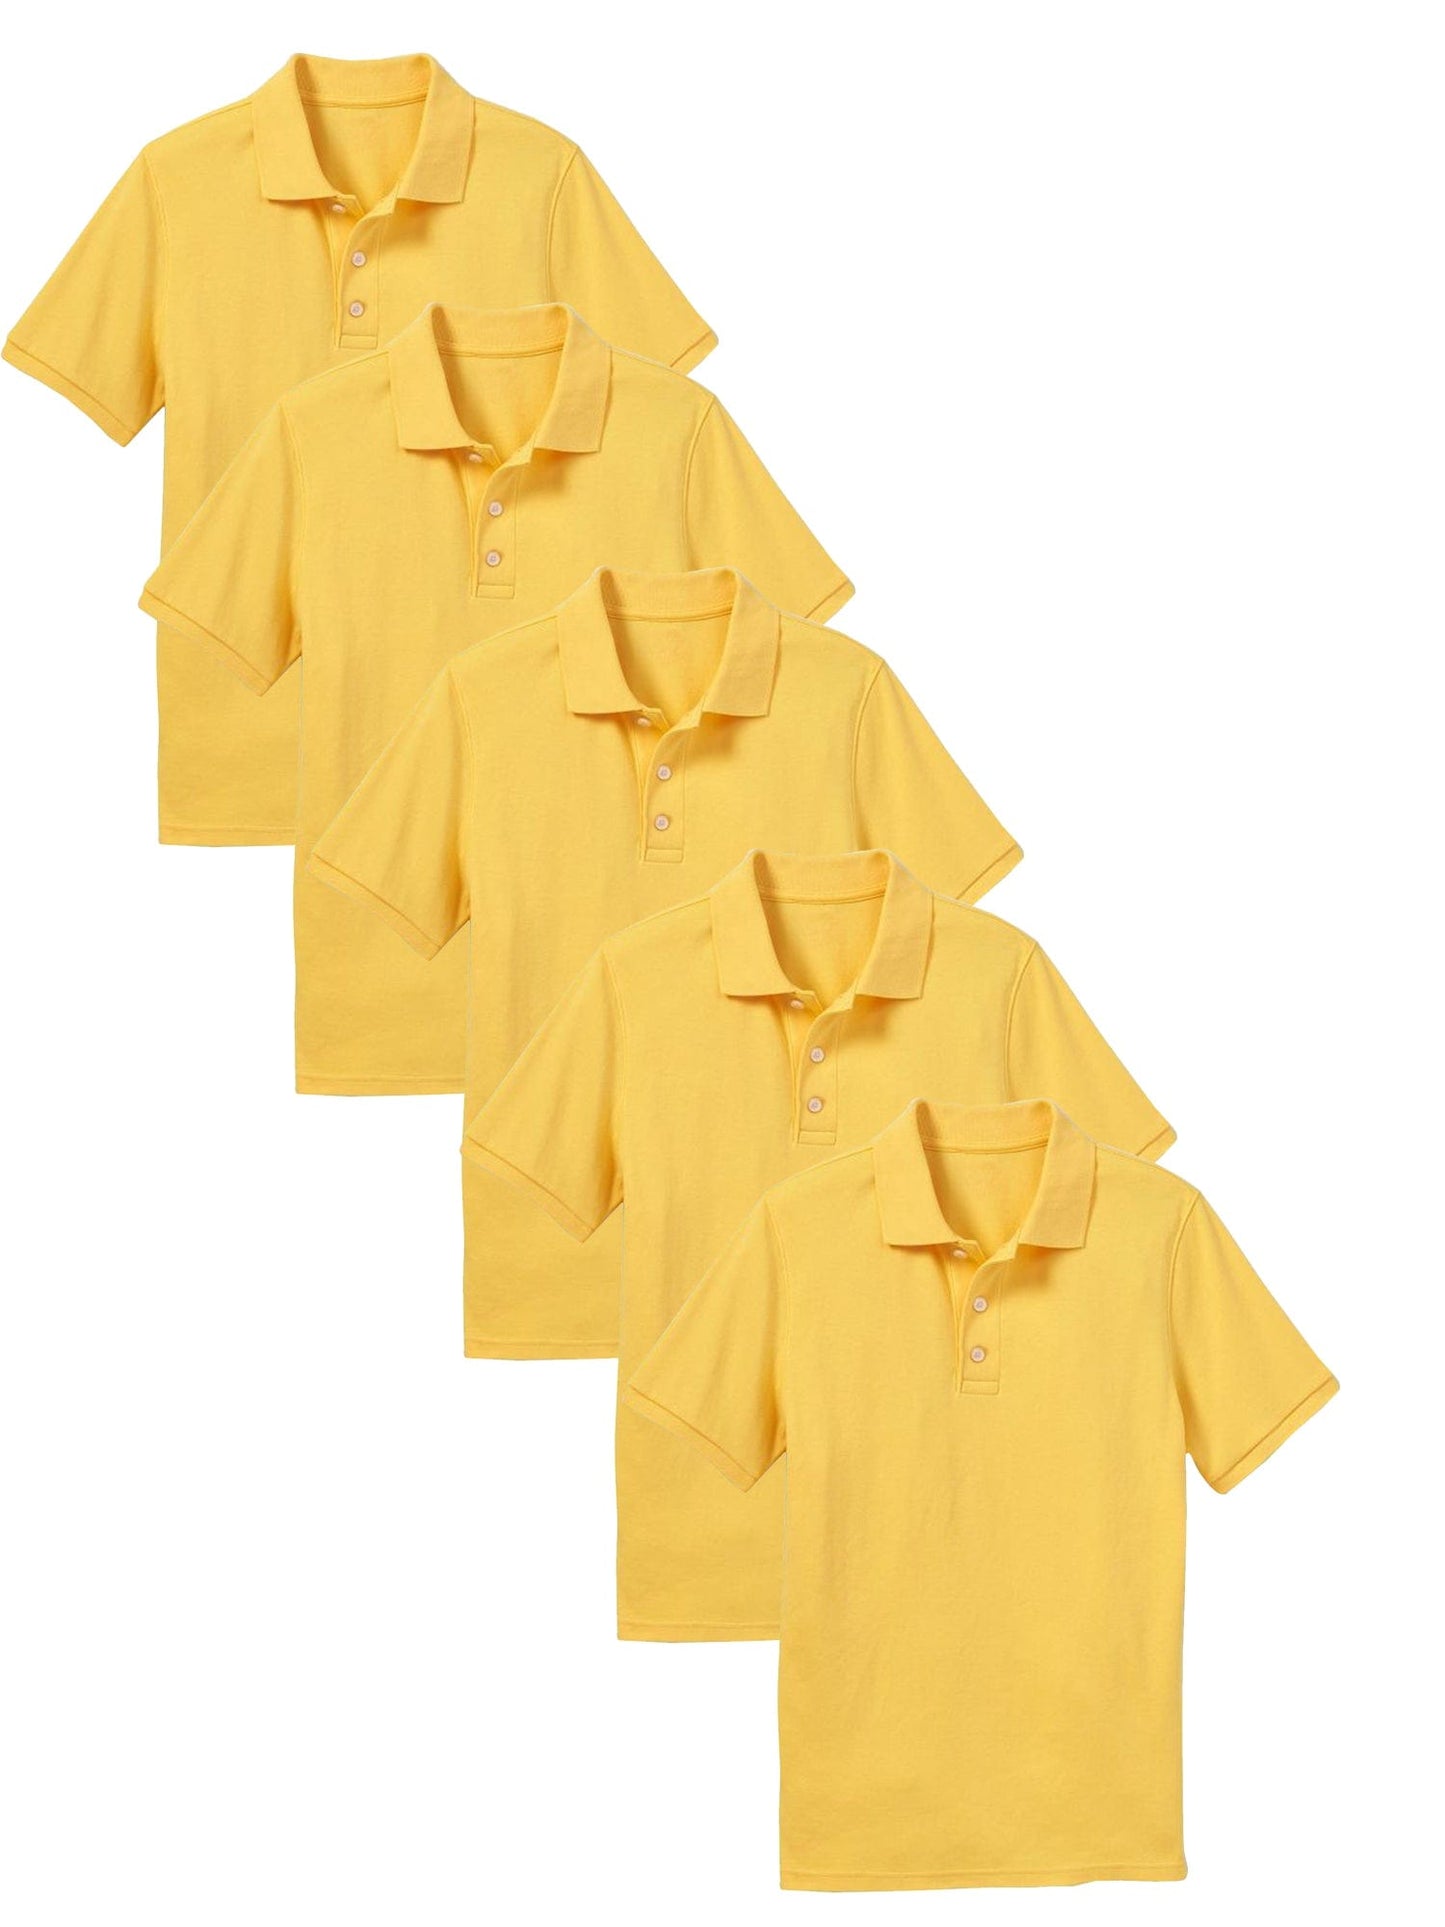 Young Boy's (5-PACK) Short Sleeve Polo Shirt (Sizes 4-7) - GalaxybyHarvic